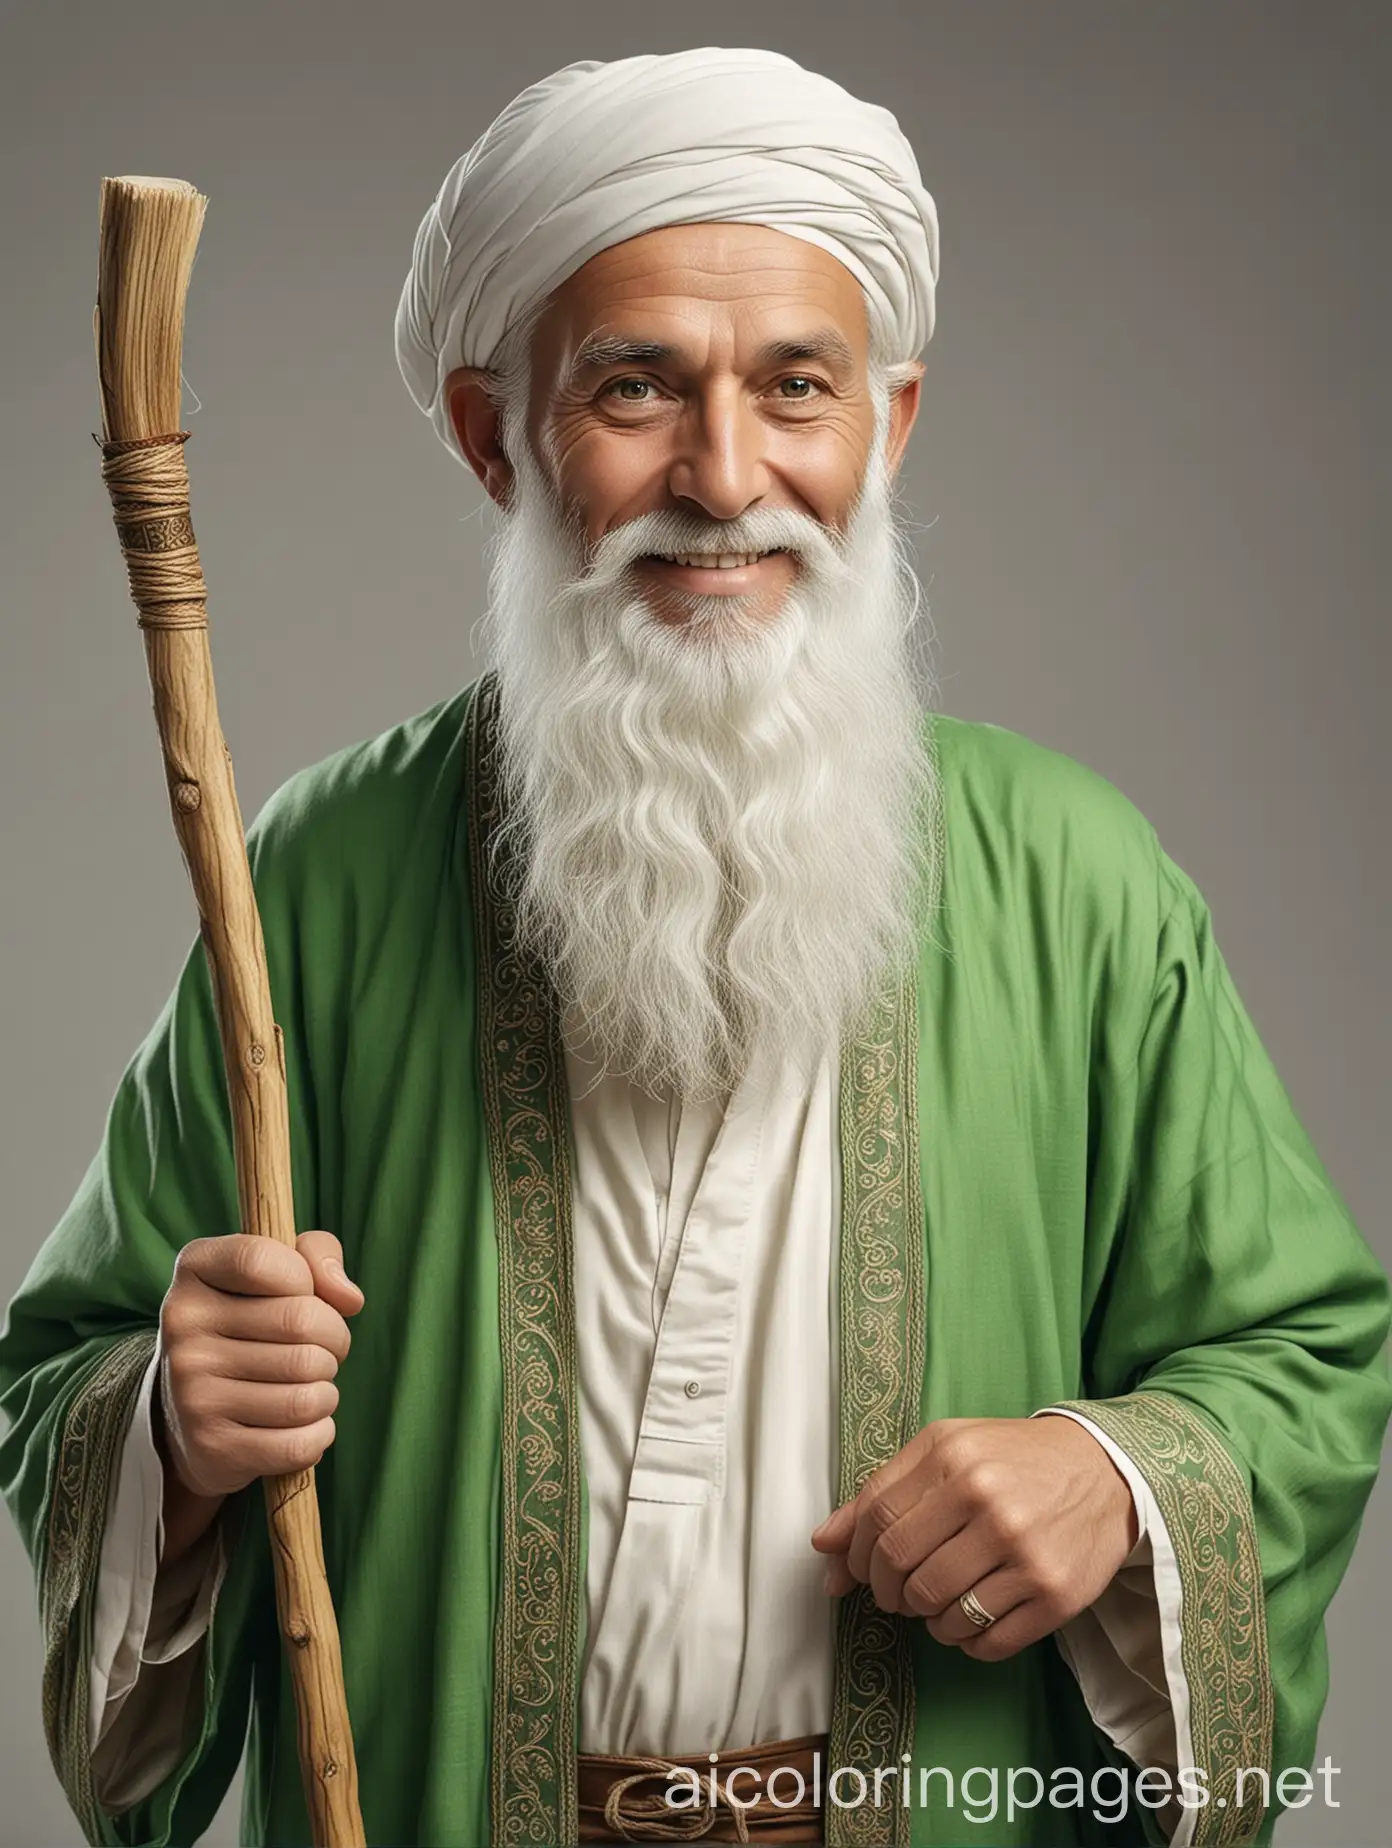 A wise middle-aged man from the Islamic era, with white skin and a long thick white beard, staring at the lens, smiling lightly, while standing, with a stick in his hand, wearing beautiful green clothes, very realistic, 4K, vintage, so that the whole body appears, the successor of the pictures is an old book library. , Coloring Page, black and white, line art, white background, Simplicity, Ample White Space. The background of the coloring page is plain white to make it easy for young children to color within the lines. The outlines of all the subjects are easy to distinguish, making it simple for kids to color without too much difficulty